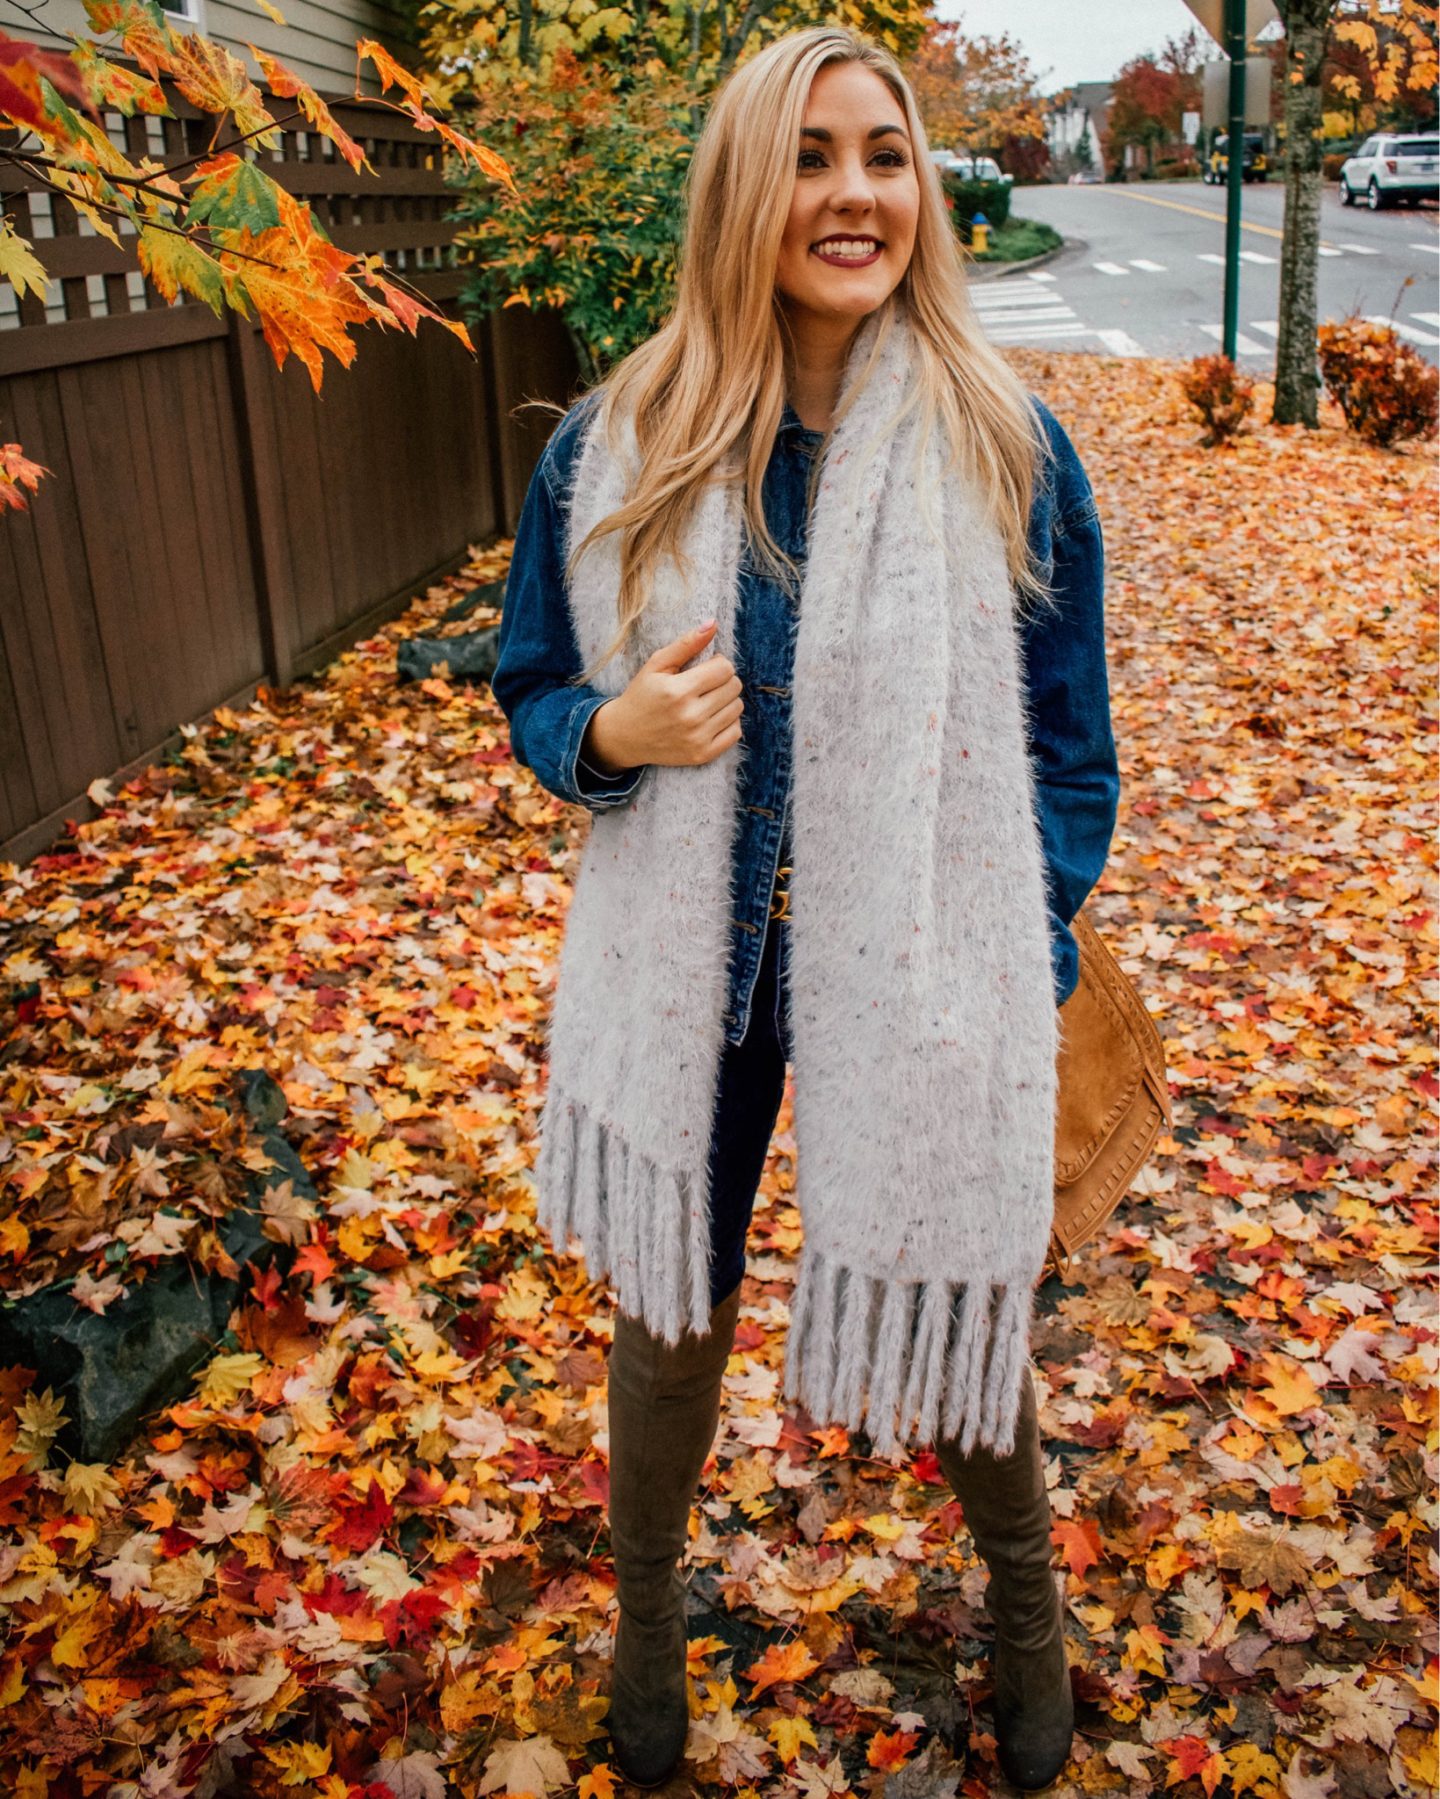 Instagram Roundup: 35 Cute Outfit Ideas: Amy Bjorneby